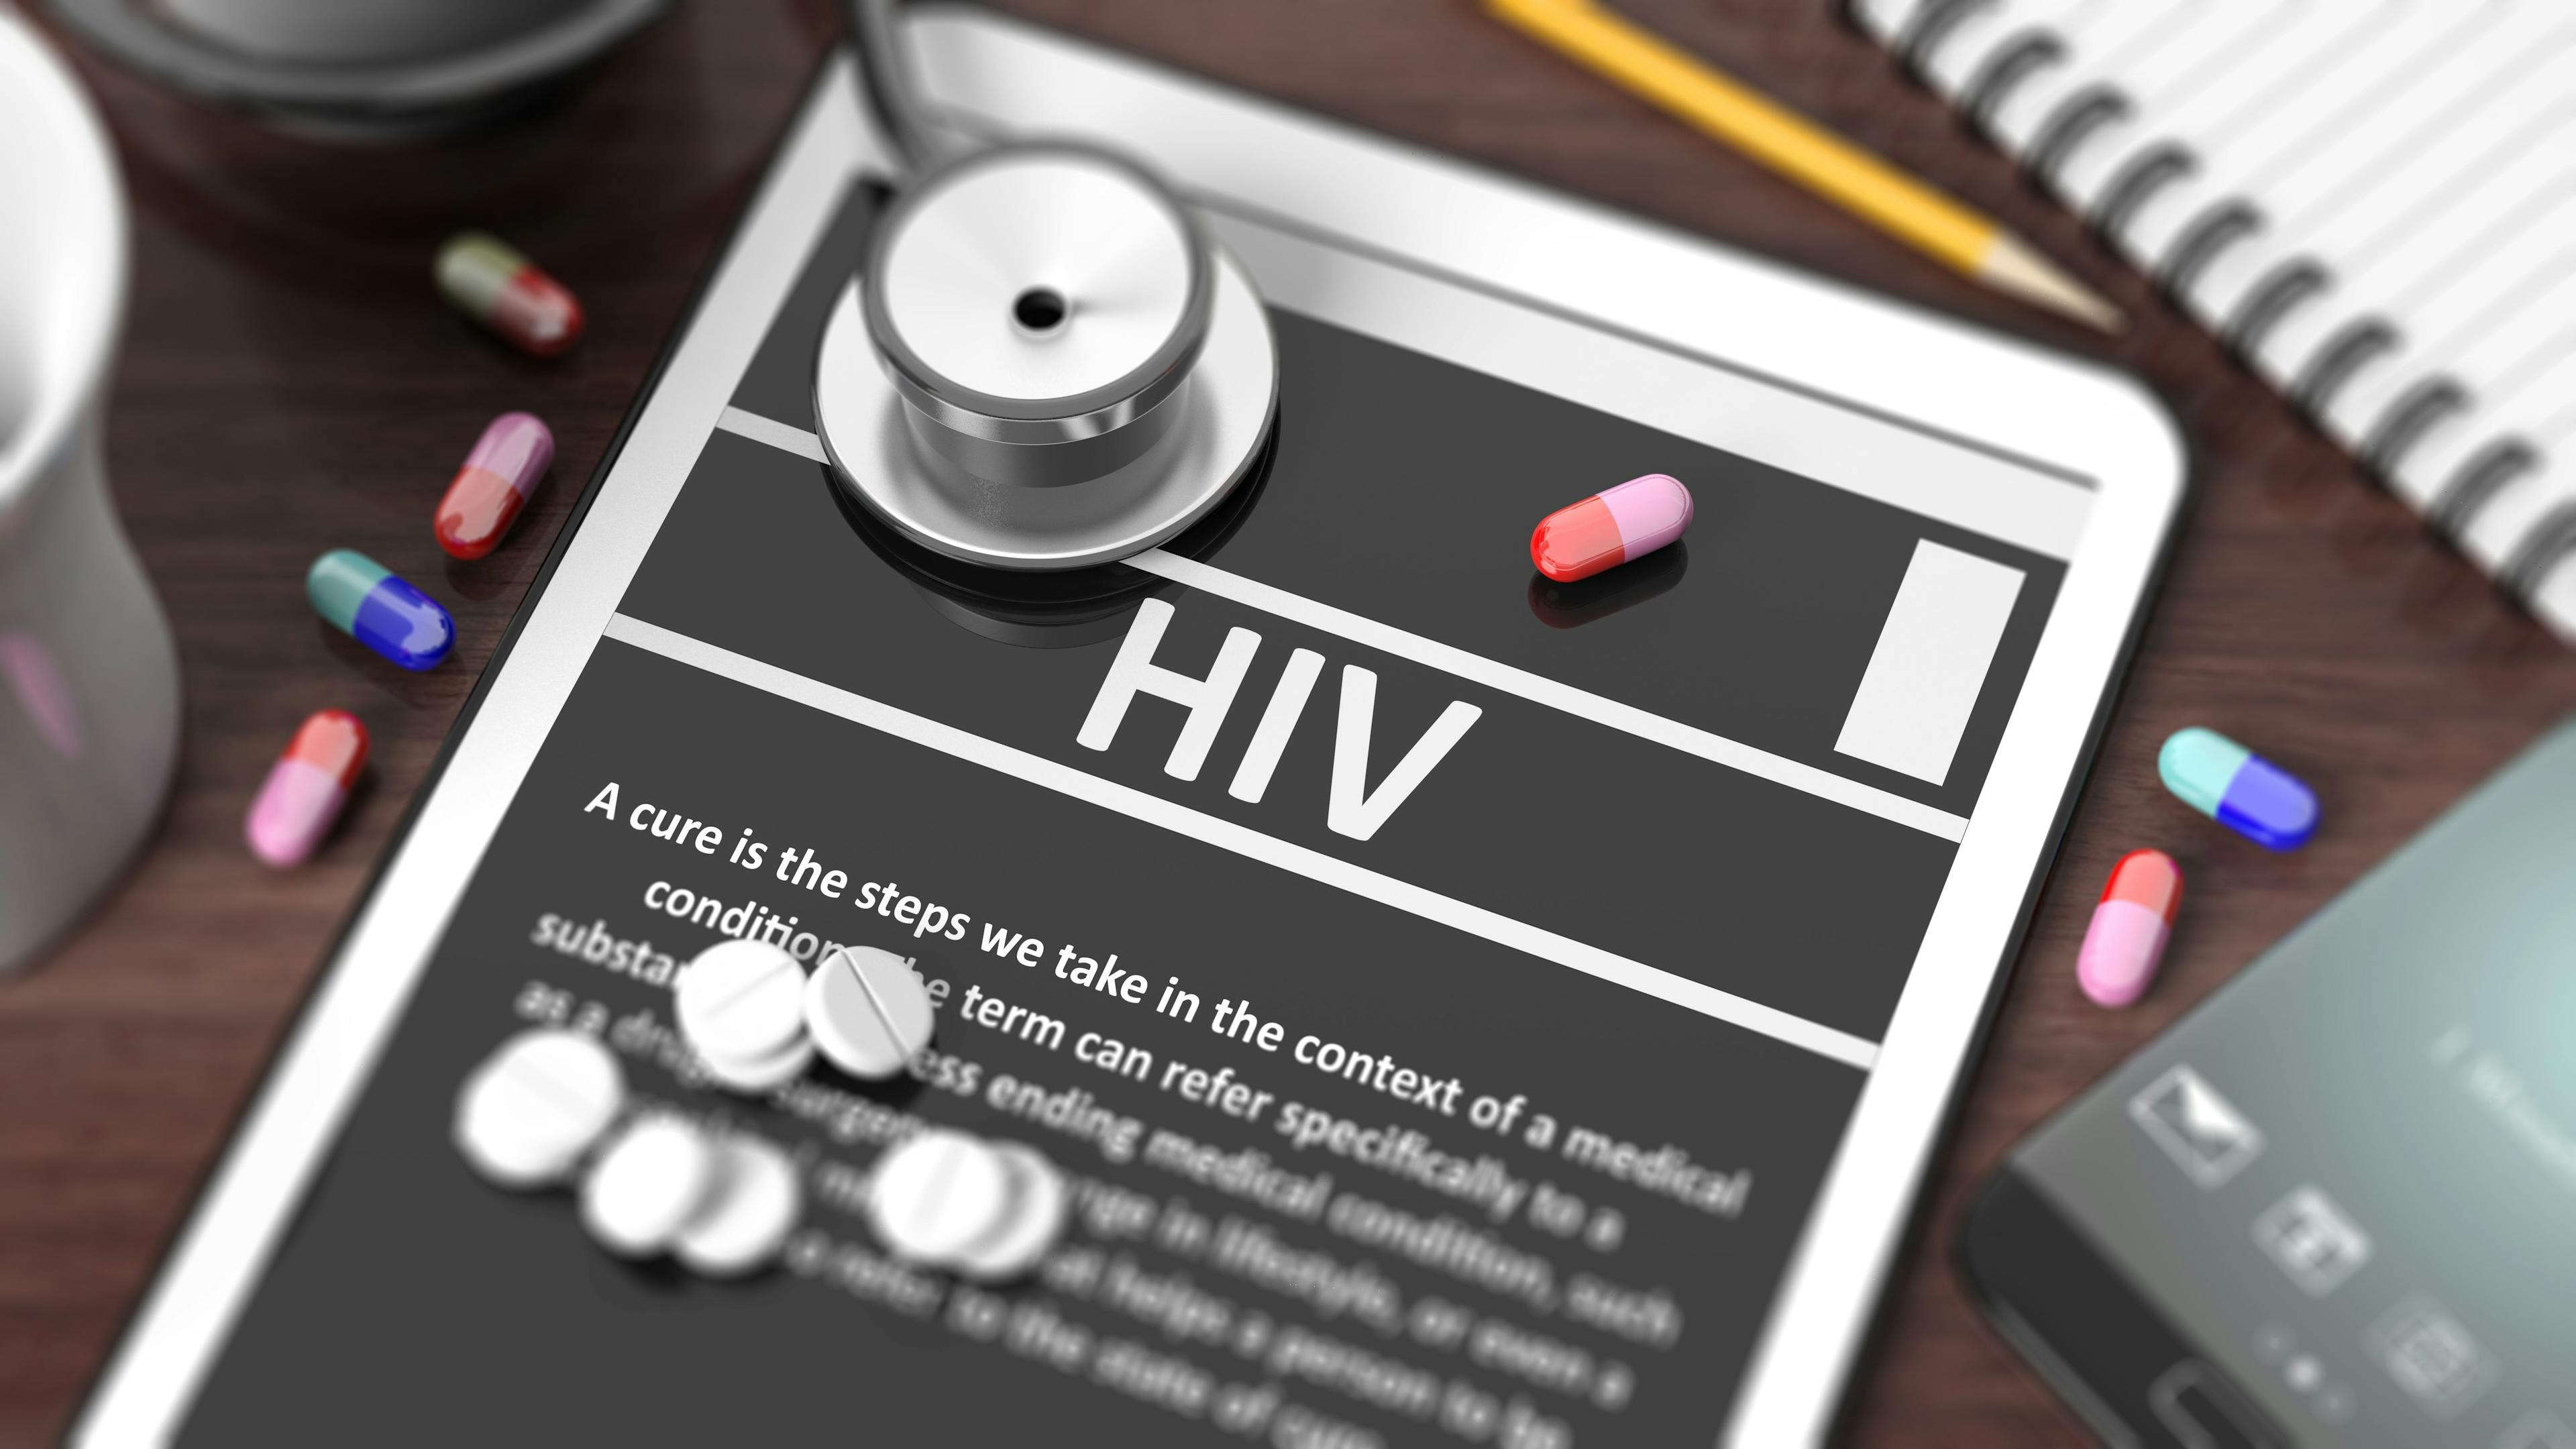 HIV Experts Discuss Conditions, Functionalities for Patient Use of COMTRAC-HIV App